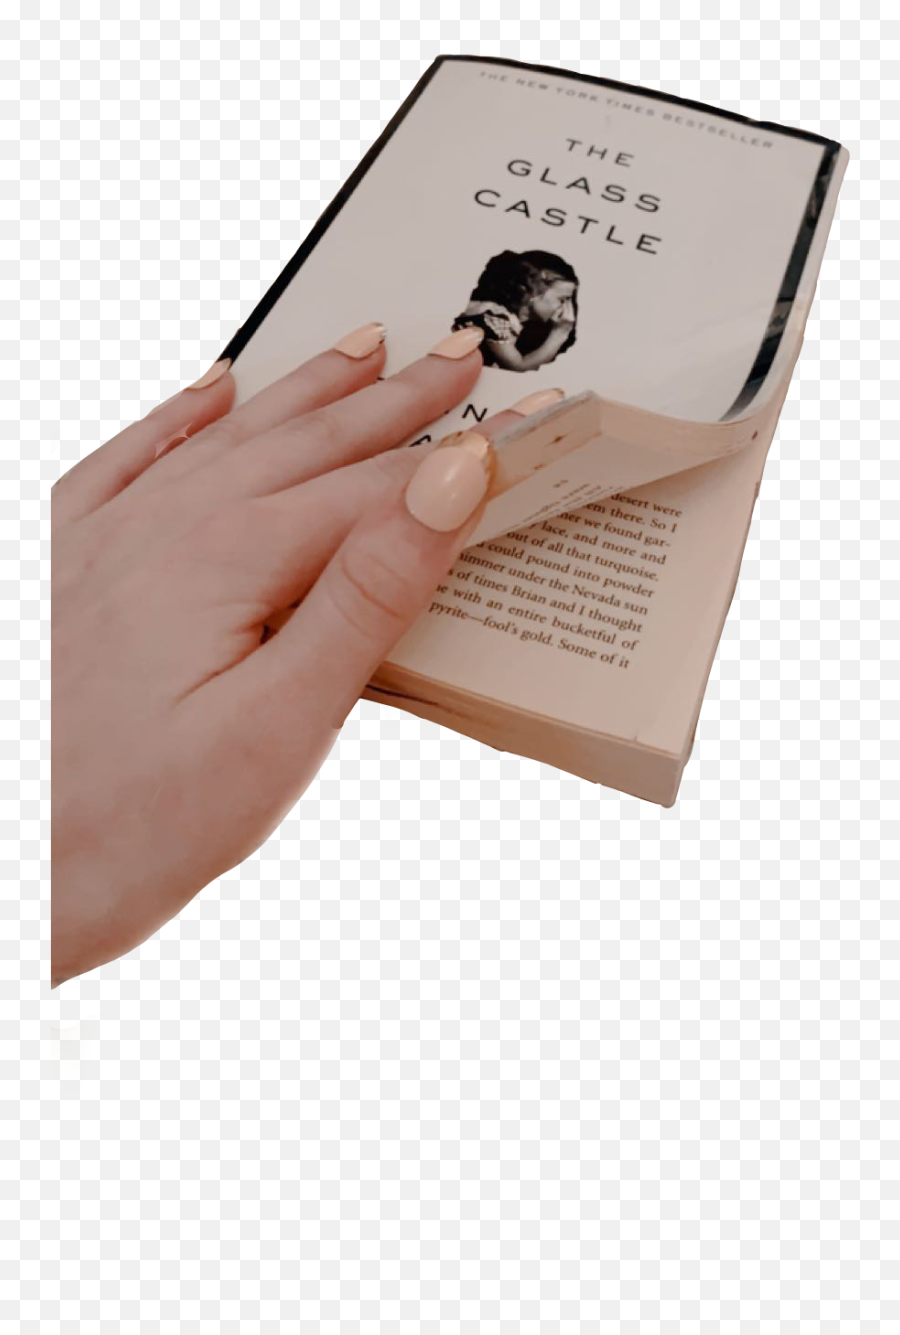 Book Read Hand Bookhand Sticker By Shawn Mendes - Glass Castle By Jeannette Walls Emoji,Castle Book Emoji